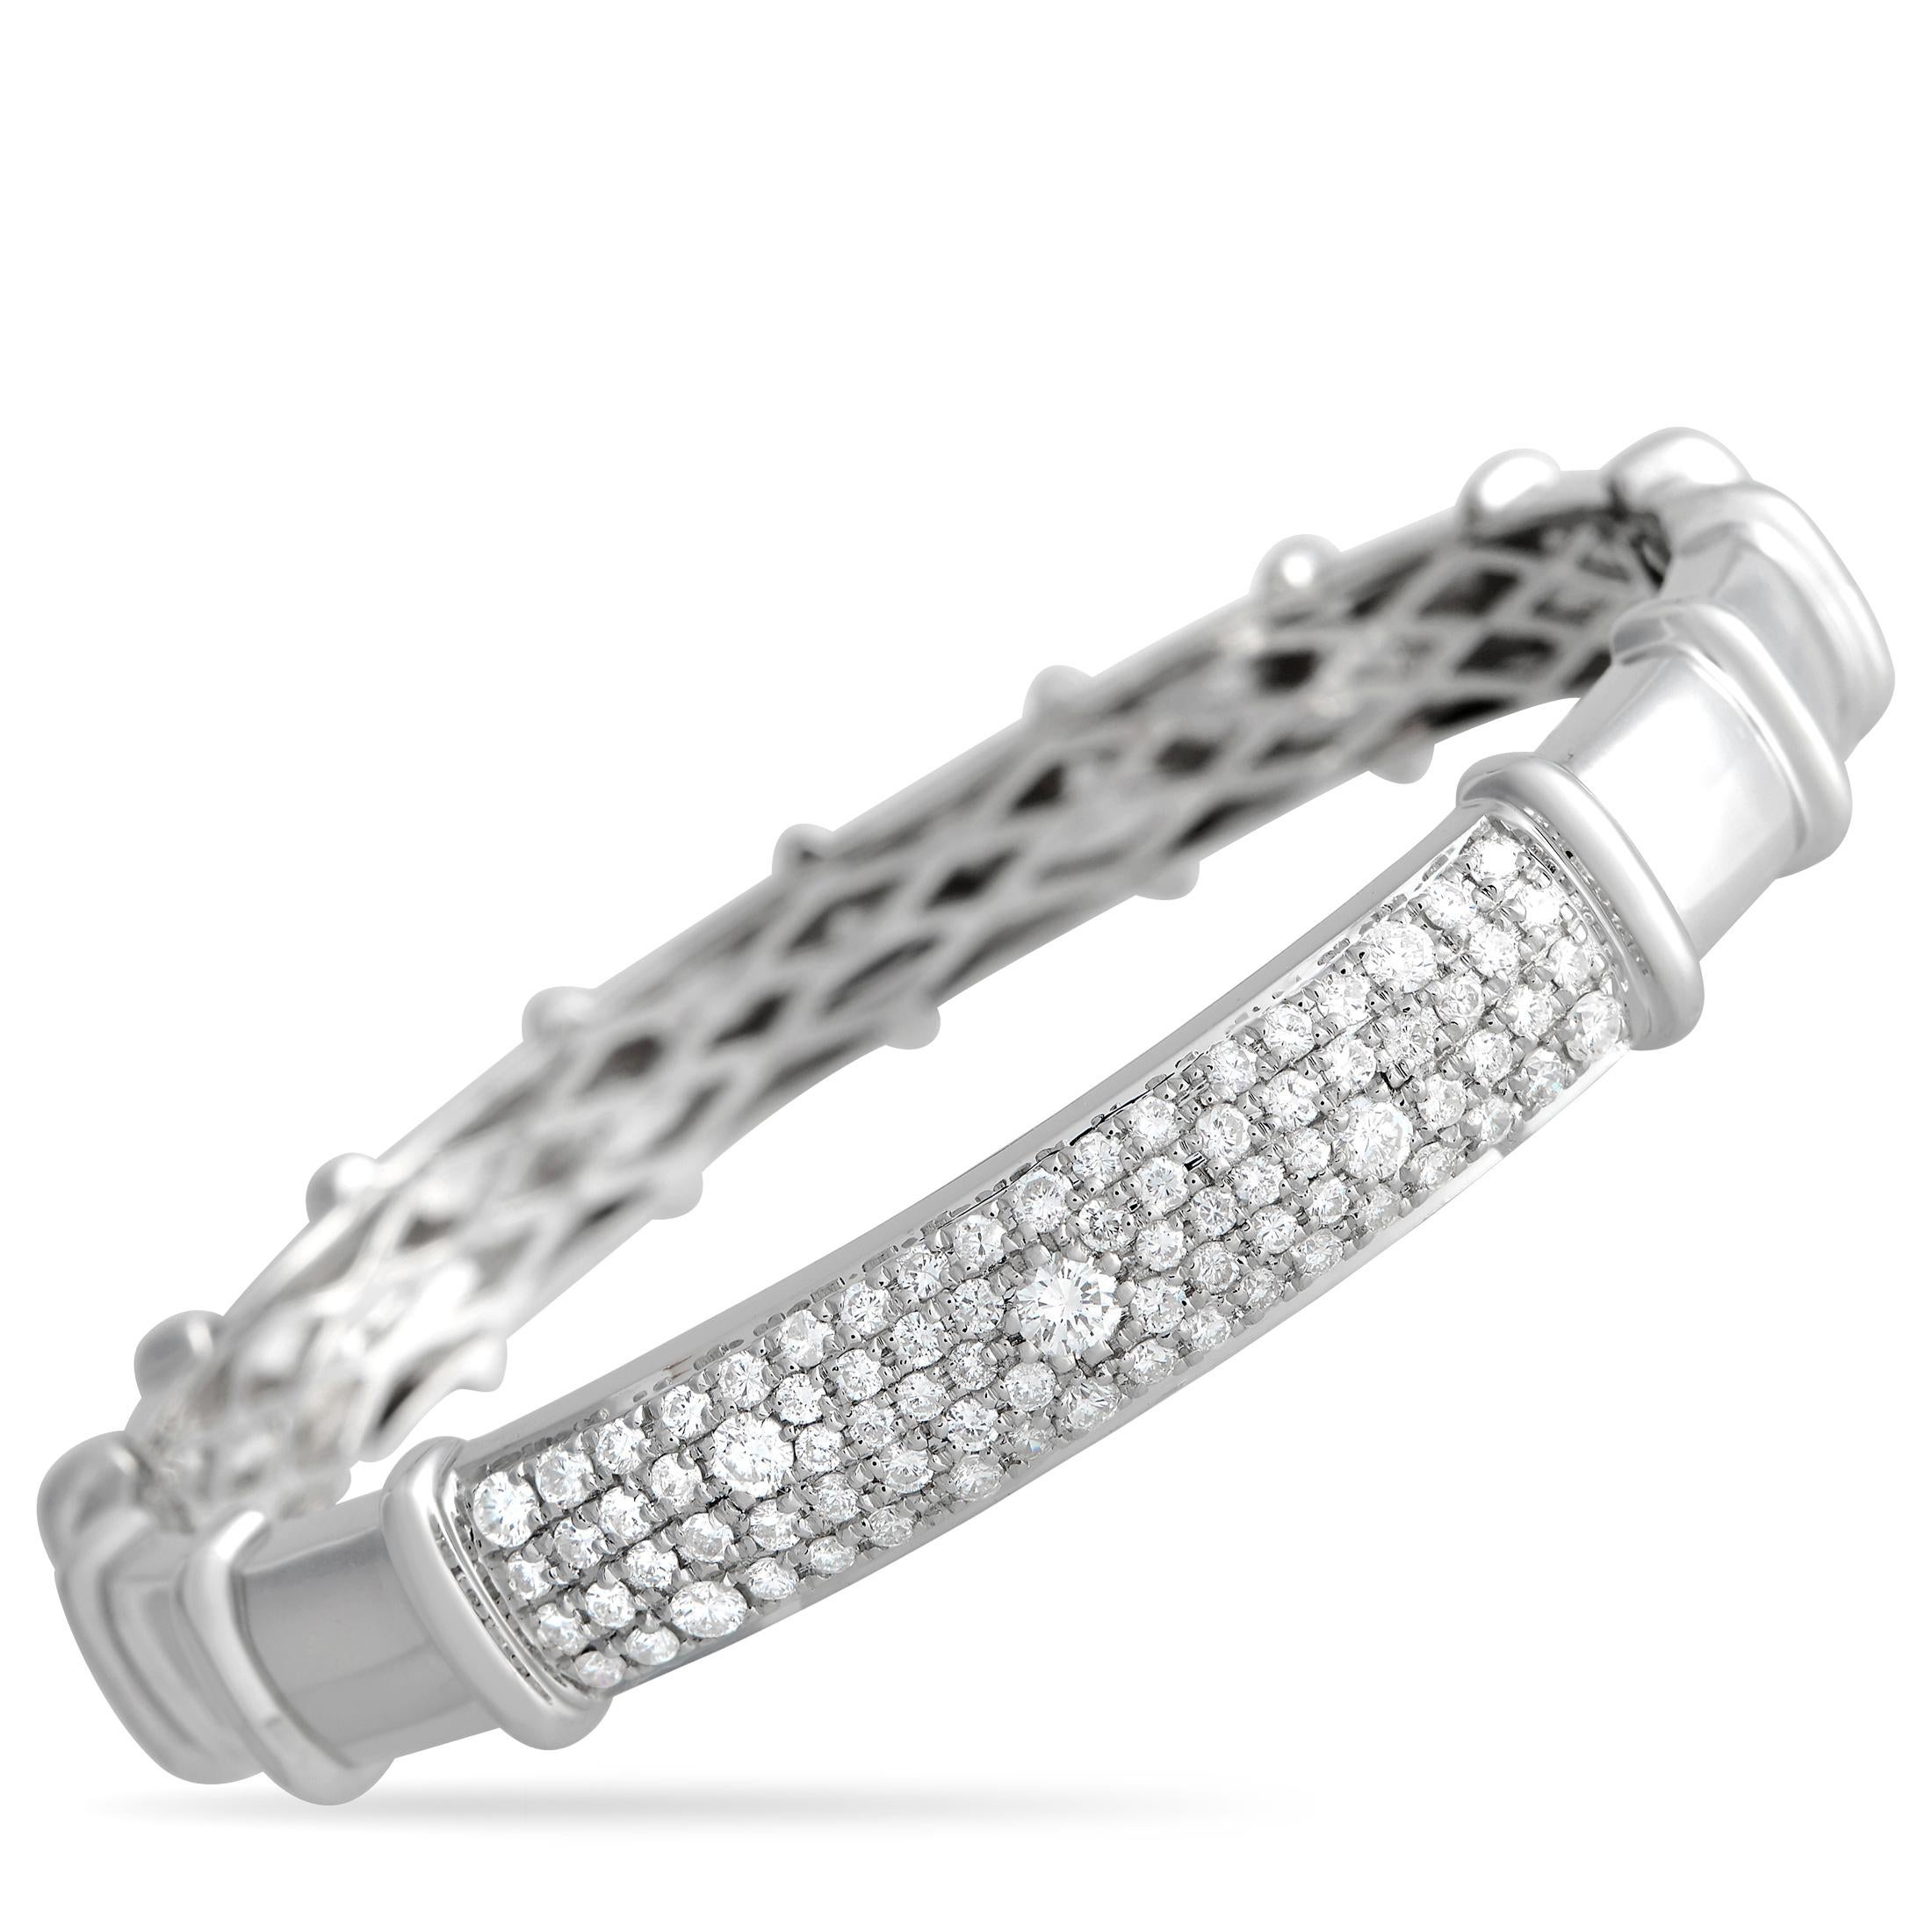 LB Exclusive 18K White Gold 2.02ct Diamond Bracelet In New Condition For Sale In Southampton, PA